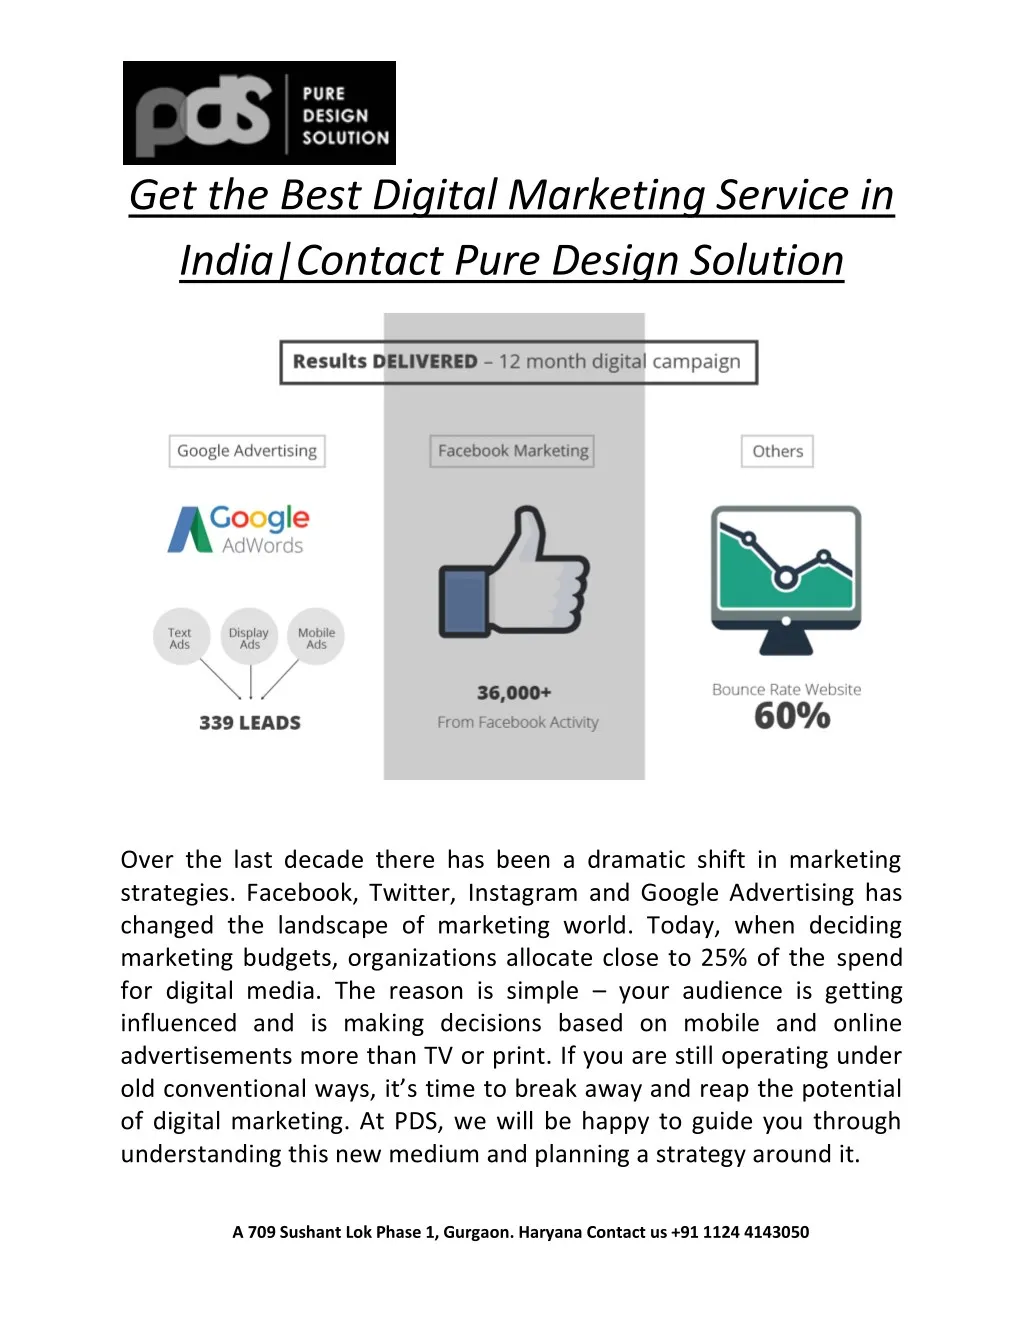 get the best digital marketing service in india